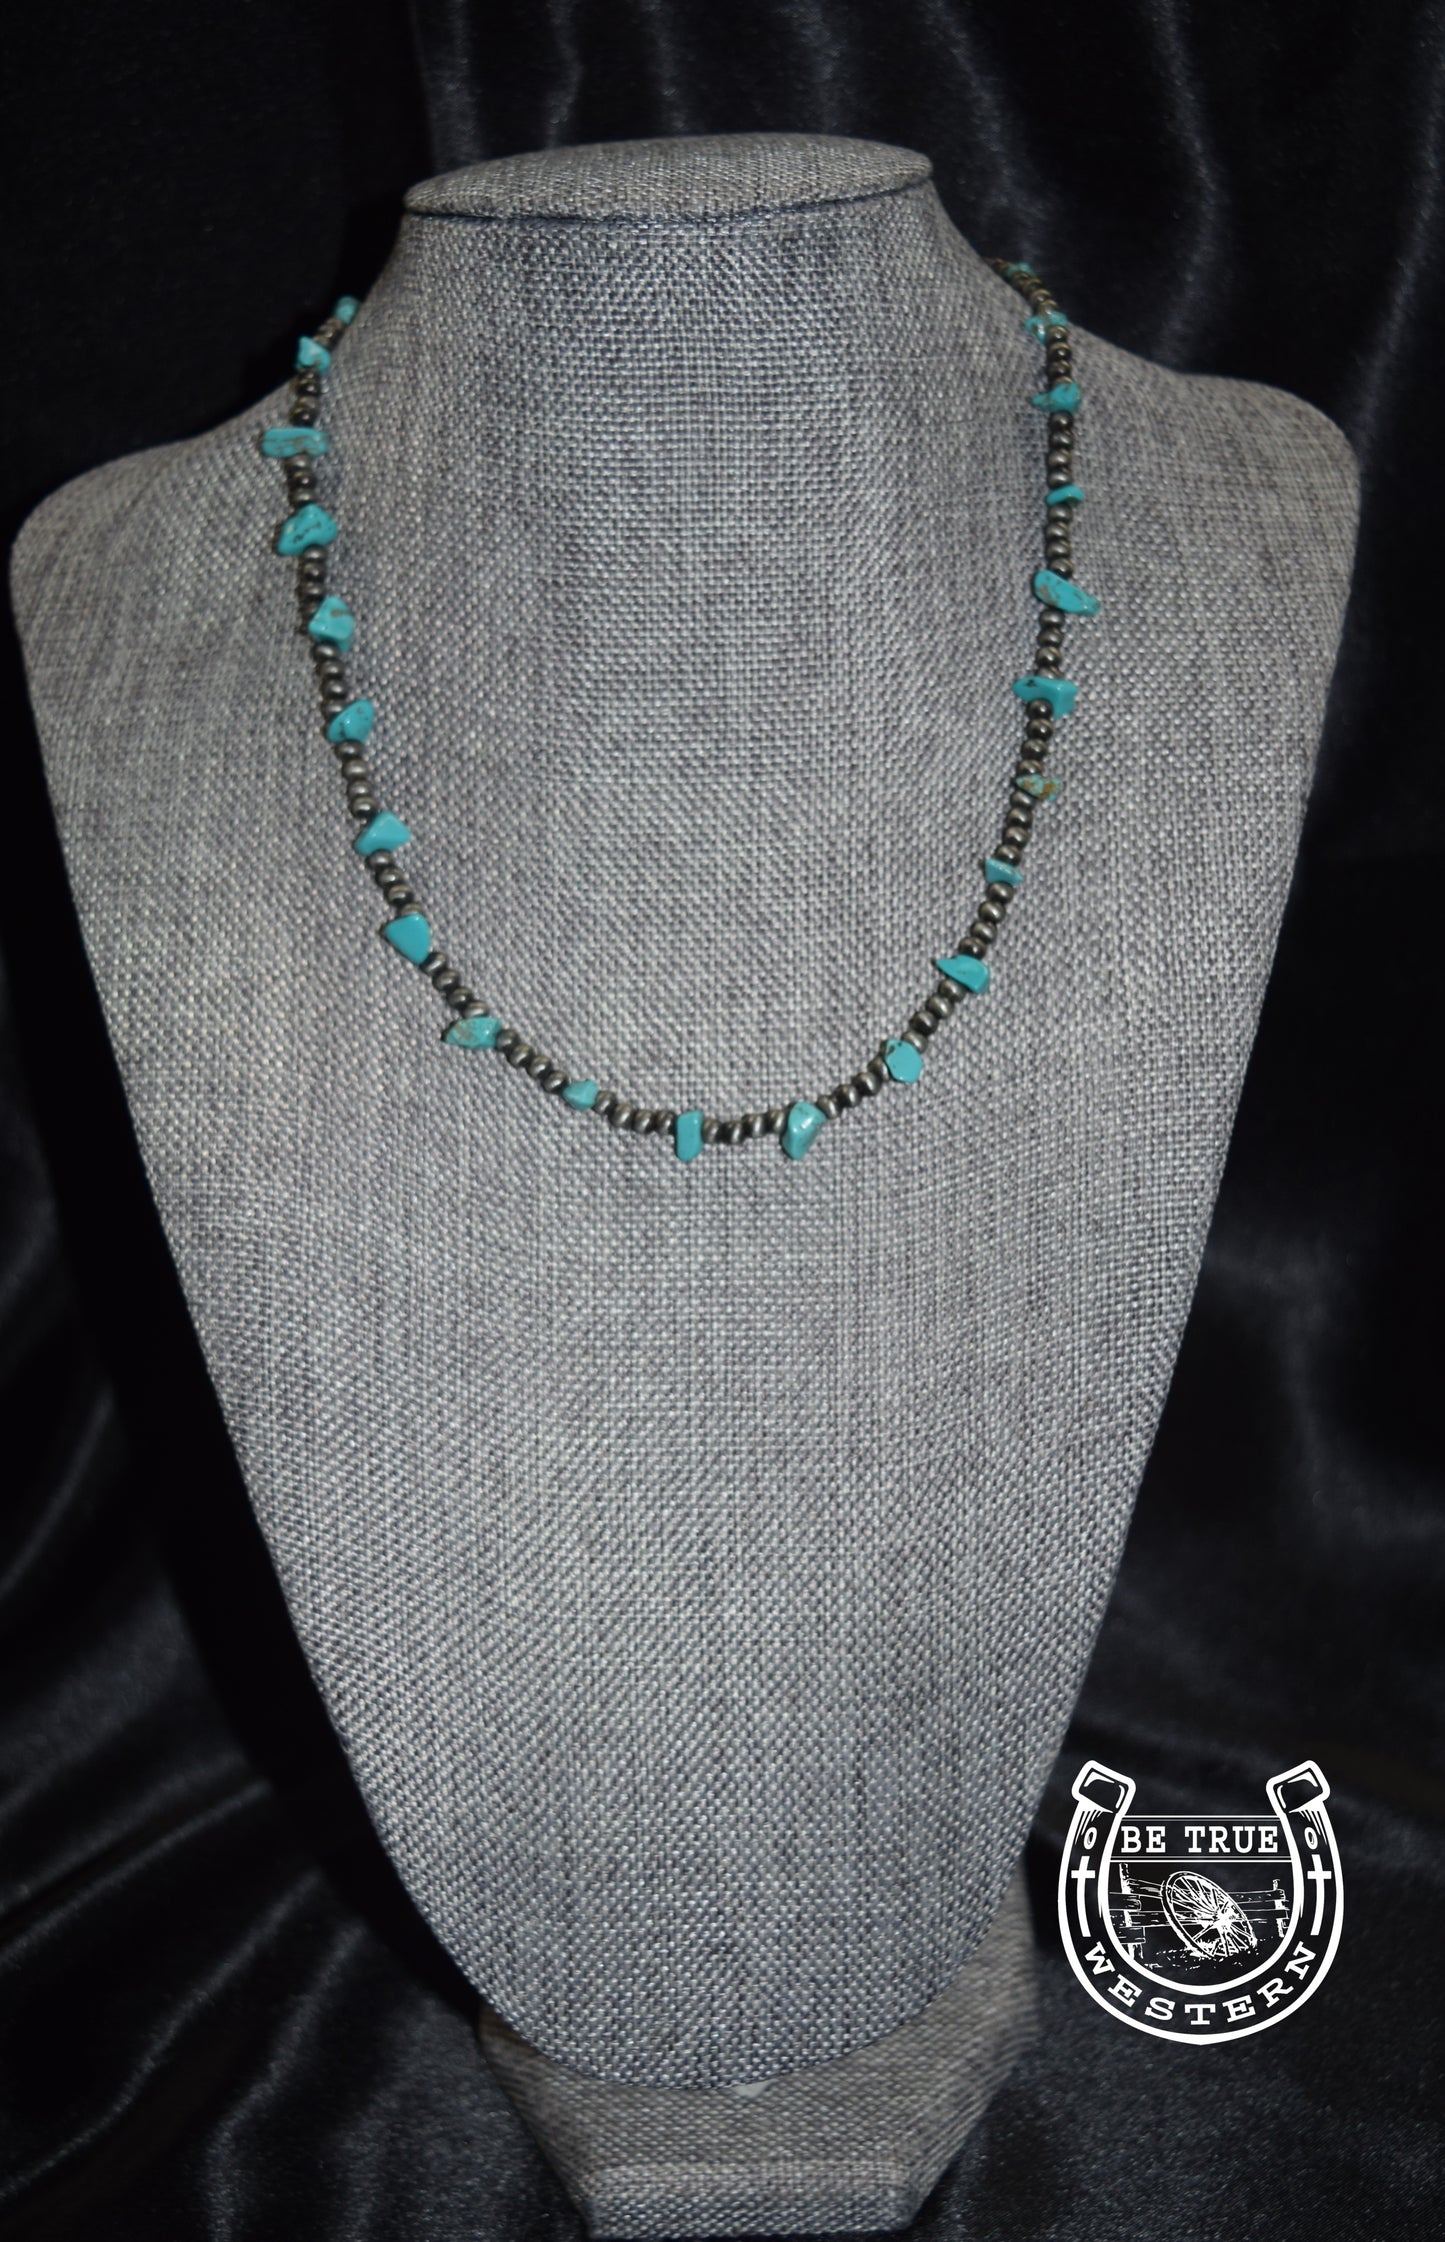 The Pearl & Turquoise Chip Stone Necklace